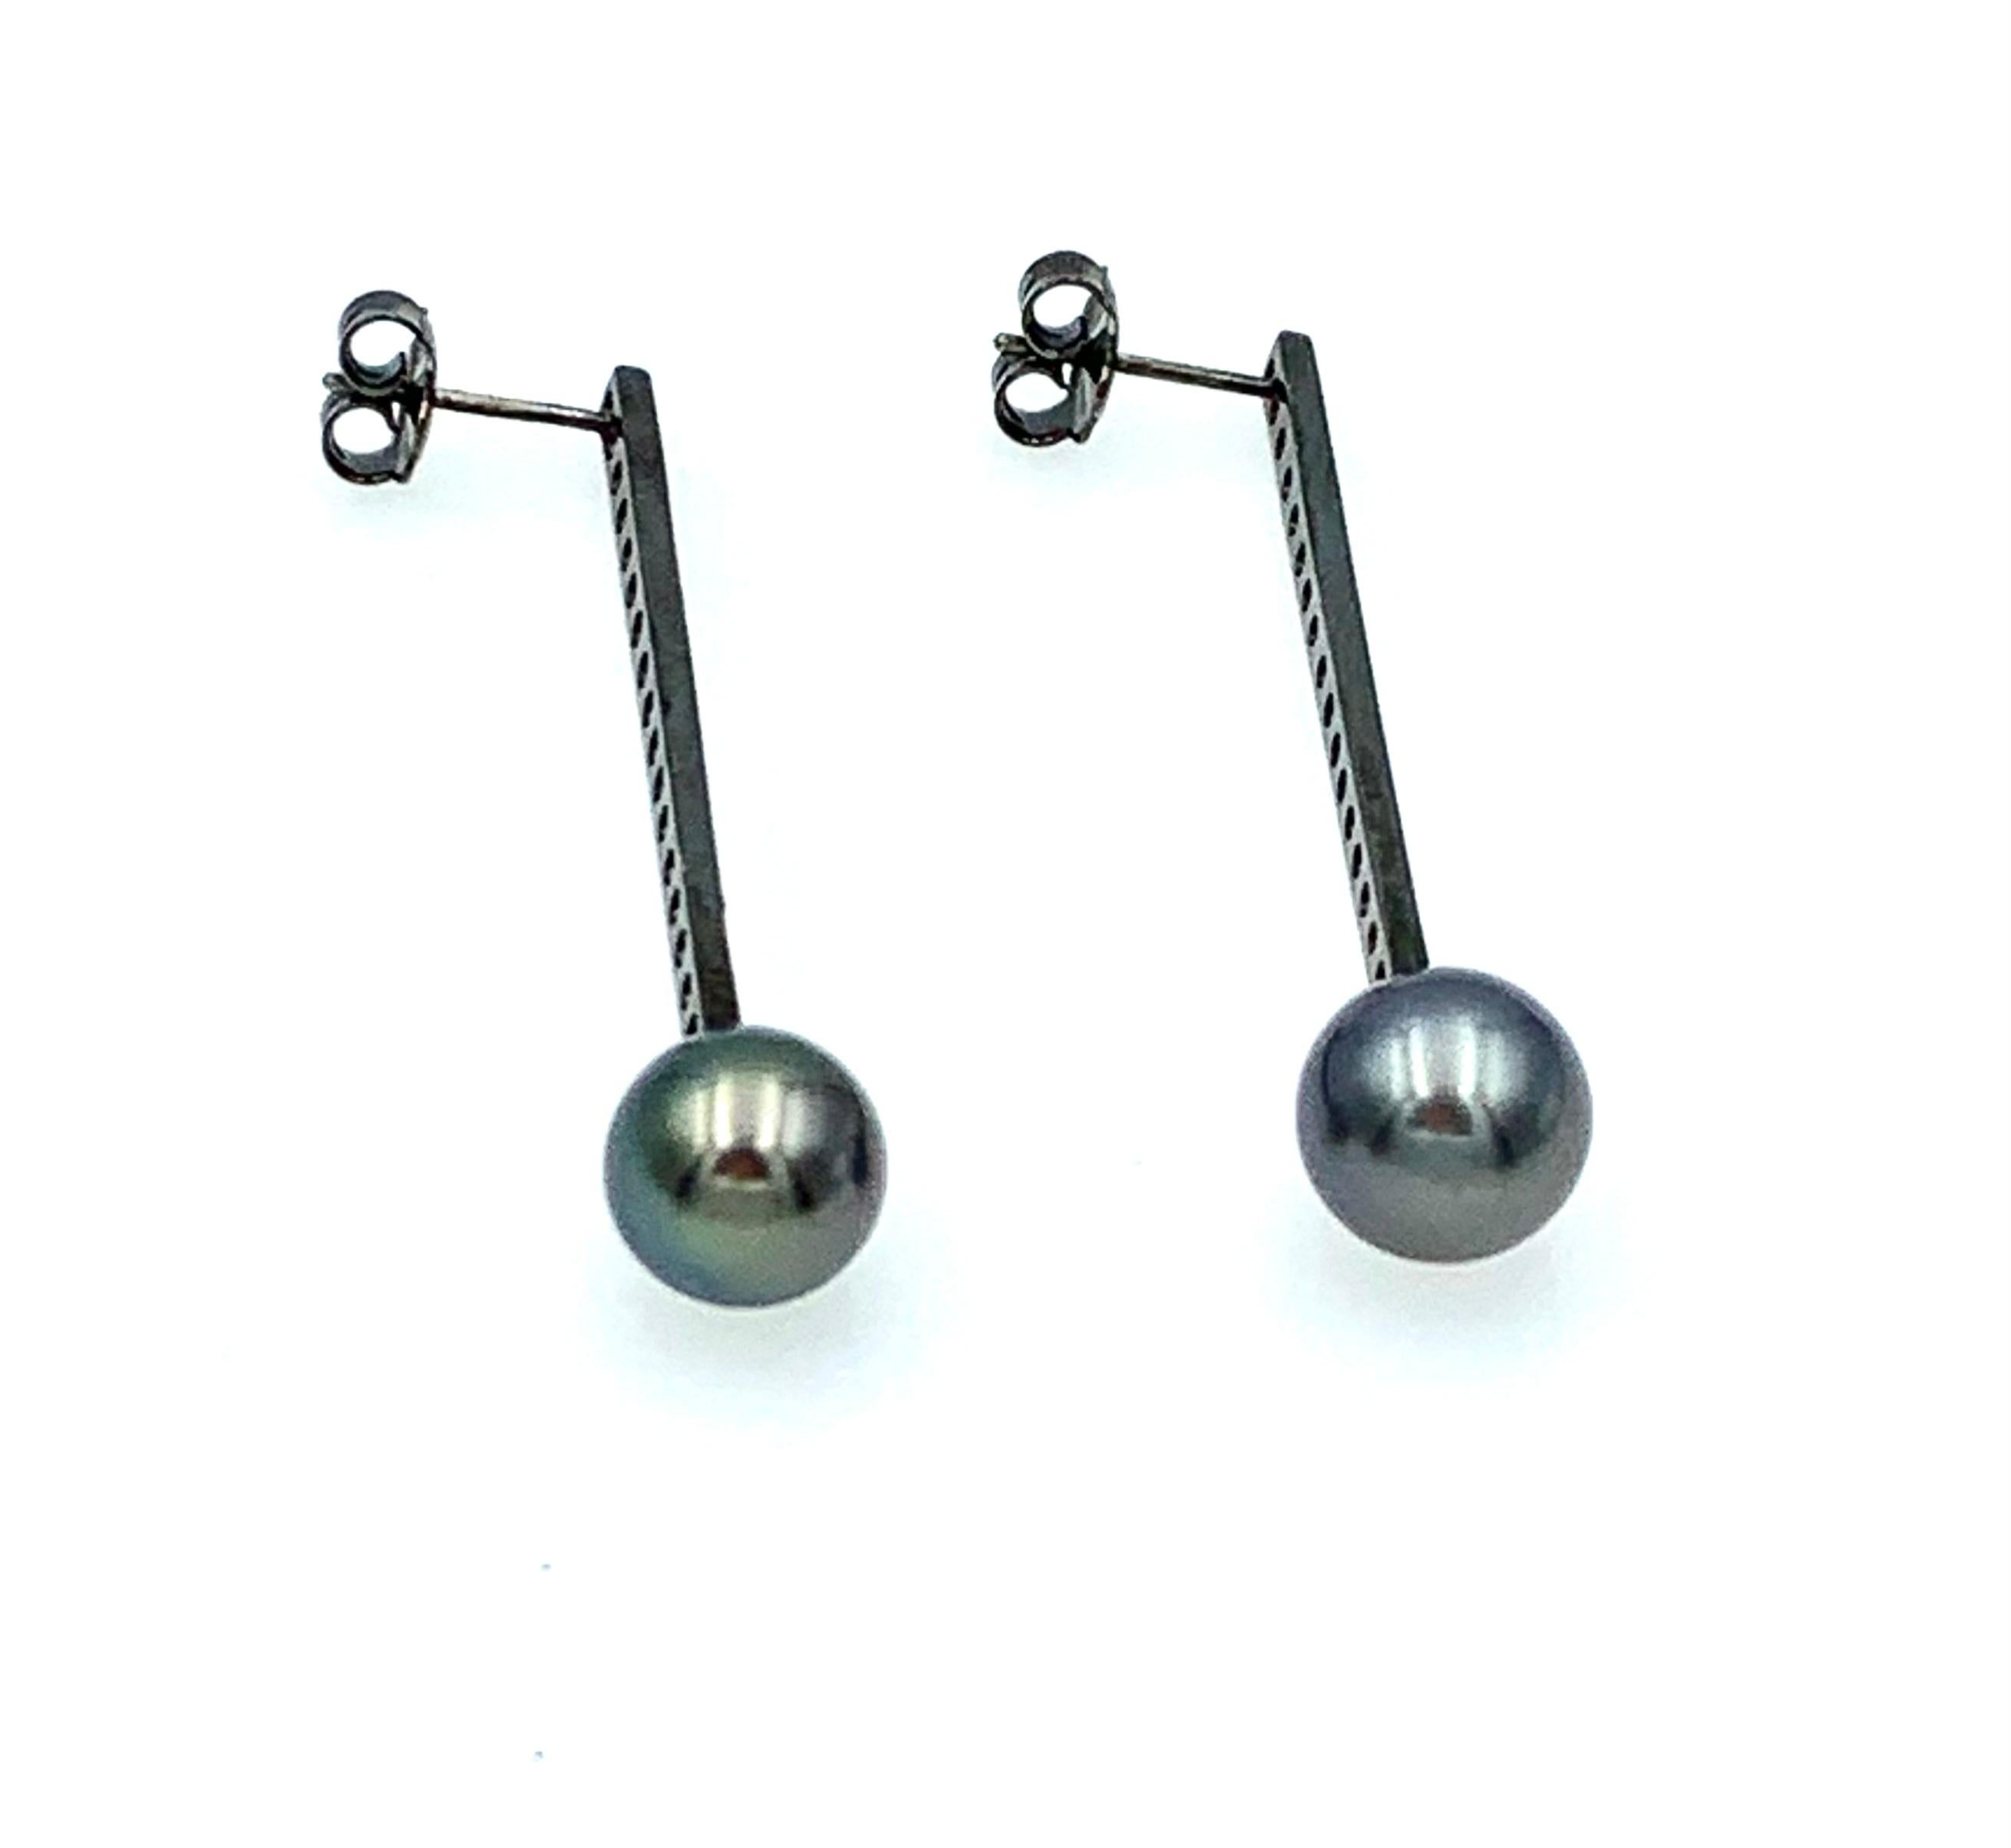 Hand made in 18 karat white gold and plated in black Rhodium, these earring have each a 2